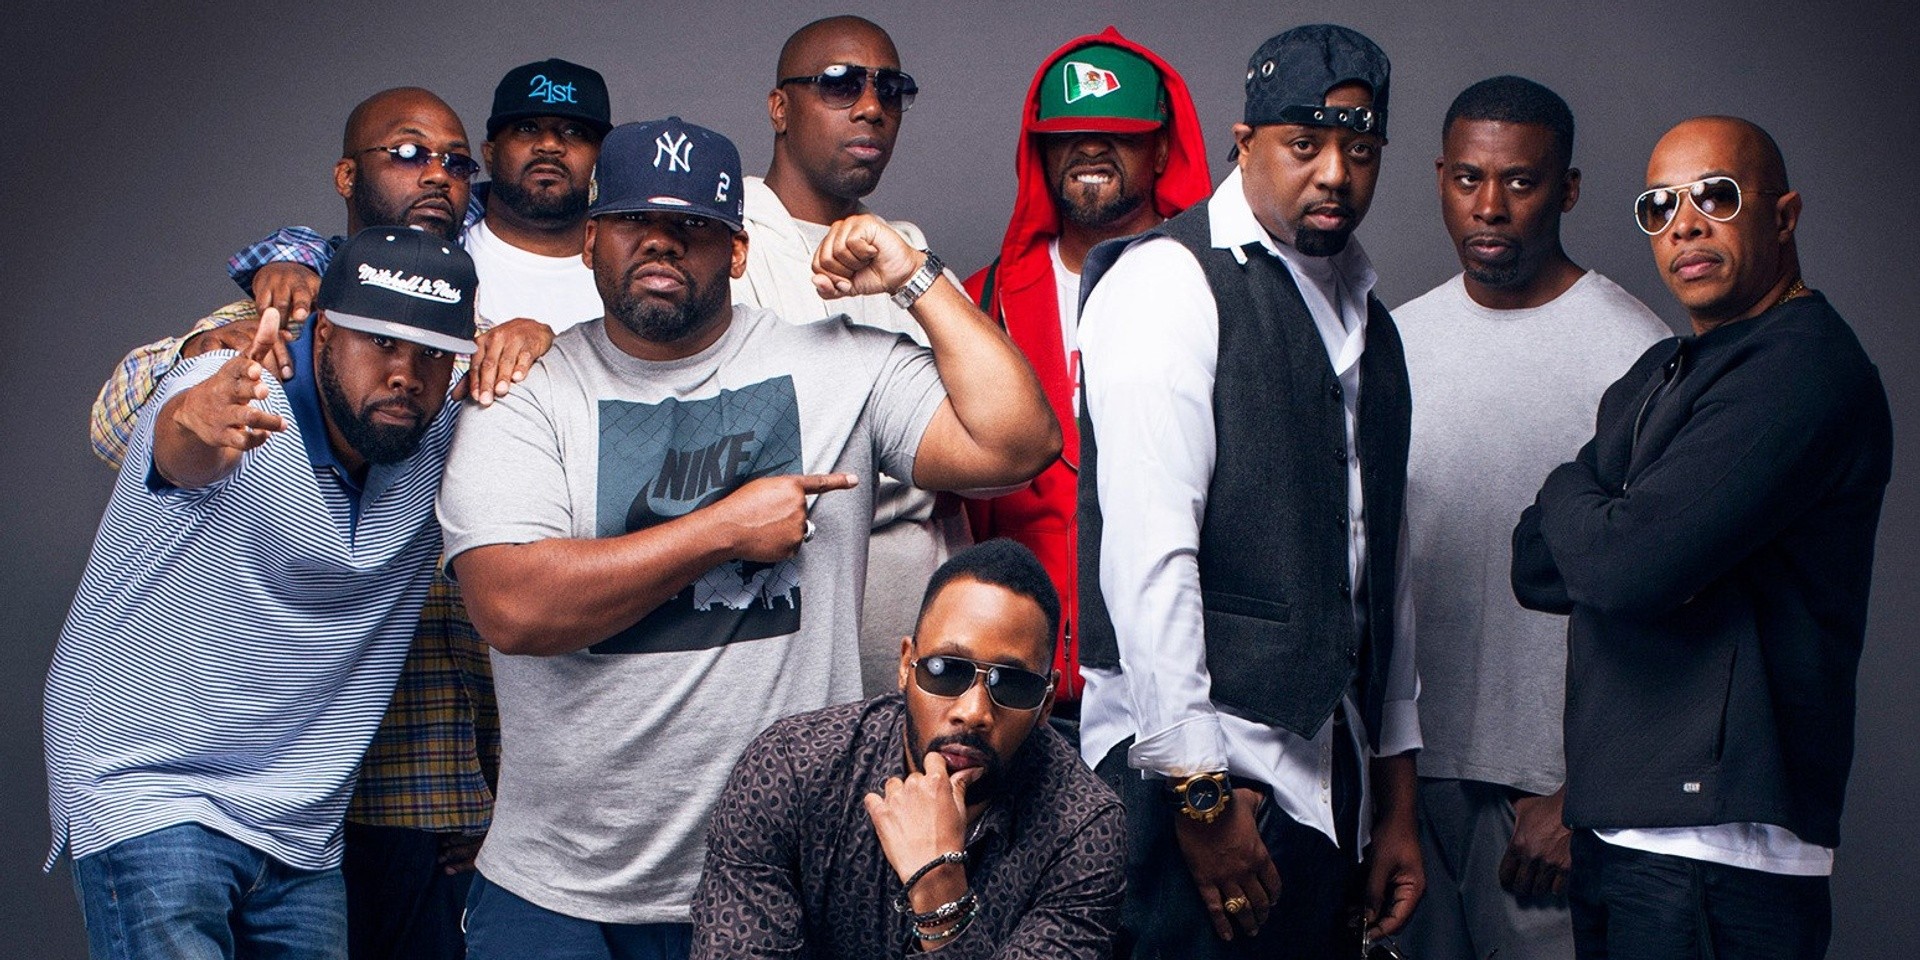 Wu-Tang Clan announce 36 Chambers 25th anniversary shows in Australia 